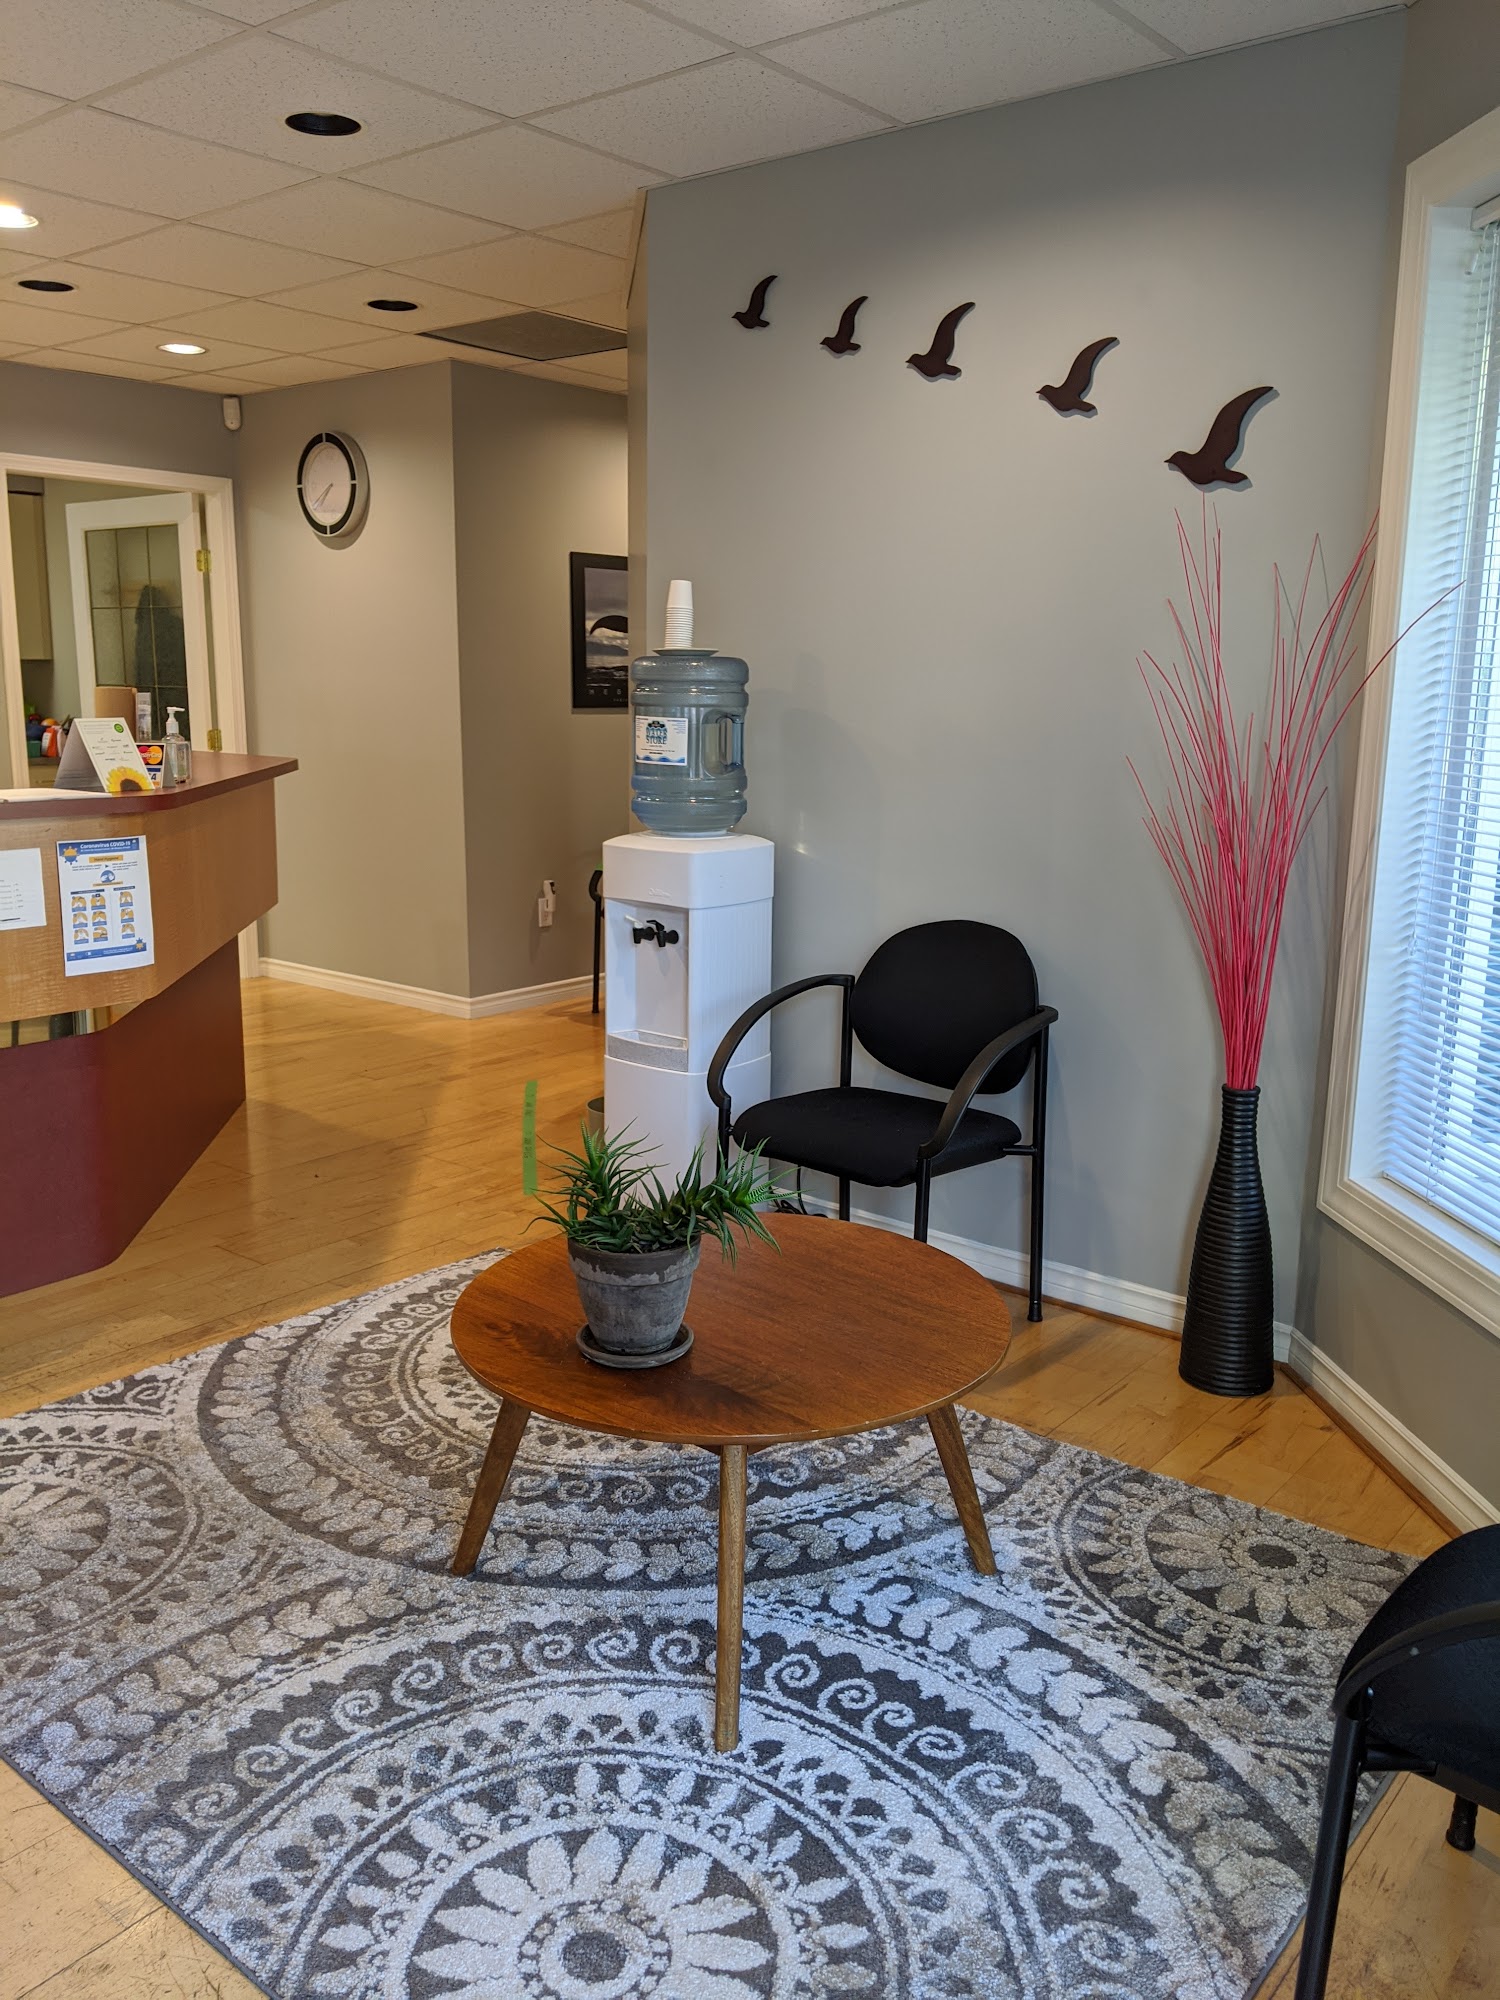 Madrona Massage Therapy 2490 Bevan Ave, Sidney British Columbia V8L 5C6